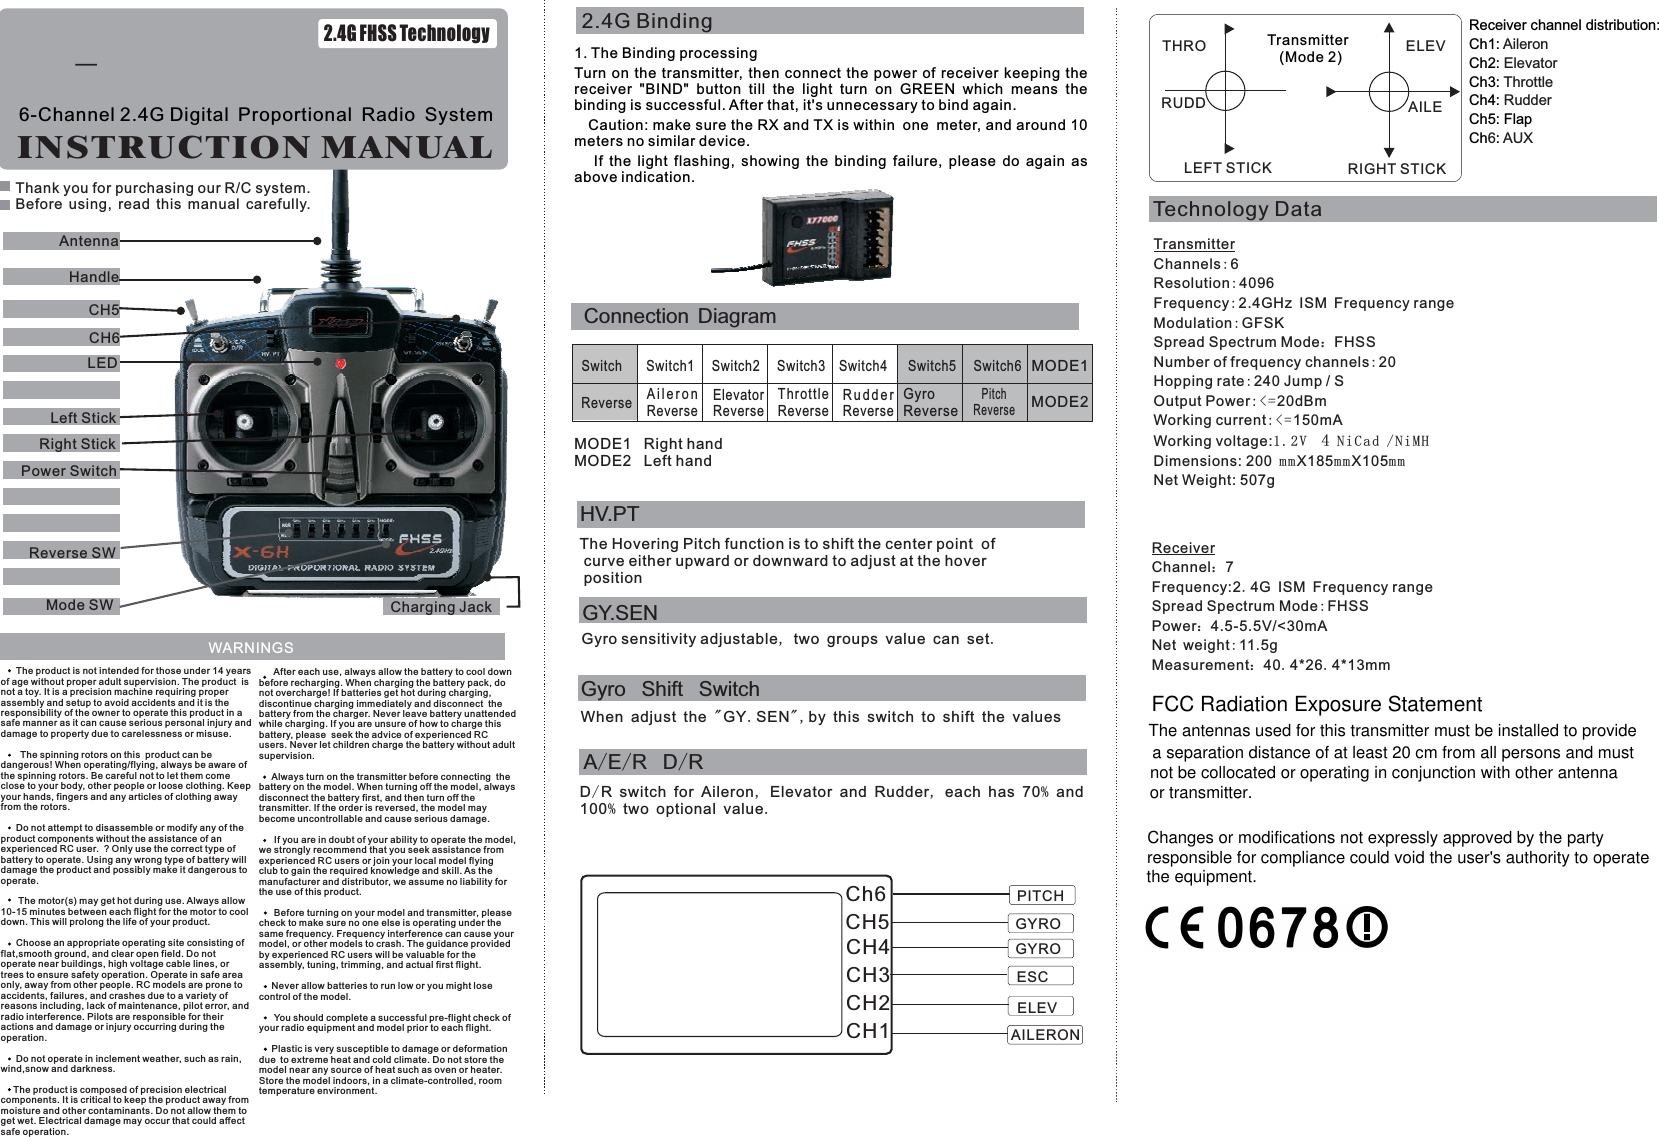 INSTRUCTION MANUAL2.4G Binding6-Channel 2.4G Digital Proportional Radio SystemPower SwitchLeft Stick2.4G FHSS TechnologyRight StickReverse SWThank you for purchasing our R/C system.Before using, read this manual carefully.Charging JackReceiver channel distribution:Ch1:Ch2:Ch3:Ch4:Ch5: FlapCh :AileronElevatorThrottleRudder6 AUXRIGHT STICKLEFT STICKTransmitter(Mode 2)THROCH4CH3CH2CH1XY4000AILERONAILETransmitterChannels 6Resolution 4096Frequency 2.4GHz ISM Frequency rangeModulation GFSKSpread Spectrum Mode FHSSNumber of frequency channels 20Hopping rate 240 Jump / SOutput Power 20dBmWorking current 150mAWorking voltage:Dimensions: 200 X185 X105Net Weight: 507g::::：:::&lt;=:&lt;=1.2V NiCad /NiMHmm mm mm4Technology DataReceiverChannel 7Frequency:2 4G ISM Frequency rangeSpread Spectrum Mode FHSSPower 4.5-5.5V/&lt;30mANet weight 11.5gMeasurement 40 4*26 4*13mm：.:：:：. .ELEVRUDDELEVGYROSwitch       Switch1     Switch2     Switch3    Switch4      Switch5     Switch6Reverse AileronReverseElevatorReverseThrottleReverseRudderReverseConnection DiagramAntennaLEDMode SWPitchReverse1. The Binding processingTurn on the transmitter, then connect the power of receiver keeping thereceiver &quot;BIND&quot; button till the light turn on GREEN which means thebinding is successful. After that, it&apos;s unnecessary to bind again.Caution: make sure the RX and TX is within one meter, and around 10meters no similar device.If the light flashing, showing the binding failure, please do again asabove indication.CH5CH6Ch6CH5 GYROPITCHWARNINGSThe product is not intended for those under 14 yearsof age without proper adult supervision. The product  isnot a toy. It is a precision machine requiring properassembly and setup to avoid accidents and it is theresponsibility of the owner to operate this product in asafe manner as it can cause serious personal injury anddamage to property due to carelessness or misuse.The spinning rotors on this  product can bedangerous! When operating/flying, always be aware ofthe spinning rotors. Be careful not to let them comeclose to your body, other people or loose clothing. Keepyour hands, fingers and any articles of clothing awayfrom the rotors.Do not attempt to disassemble or modify any of theproduct components without the assistance of anexperienced RC user.  ? Only use the correct type ofbattery to operate. Using any wrong type of battery willdamage the product and possibly make it dangerous tooperate.The motor(s) may get hot during use. Always allow10-15 minutes between each flight for the motor to cooldown. This will prolong the life of your product.Choose an appropriate operating site consisting offlat,smooth ground, and clear open field. Do notoperate near buildings, high voltage cable lines, ortrees to ensure safety operation. Operate in safe areaonly, away from other people. RC models are prone toaccidents, failures, and crashes due to a variety ofreasons including, lack of maintenance, pilot error, andradio interference. Pilots are responsible for theiractions and damage or injury occurring during theoperation.Do not operate in inclement weather, such as rain,wind,snow and darkness.The product is composed of precision electricalcomponents. It is critical to keep the product away frommoisture and other contaminants. Do not allow them toget wet. Electrical damage may occur that could affectsafe operation.After each use, always allow the battery to cool downbefore recharging. When charging the battery pack, donot overcharge! If batteries get hot during charging,discontinue charging immediately and disconnect  thebattery from the charger. Never leave battery unattendedwhile charging. If you are unsure of how to charge thisbattery, please  seek the advice of experienced RCusers. Never let children charge the battery without adultsupervision.Always turn on the transmitter before connecting  thebattery on the model. When turning off the model, alwaysdisconnect the battery first, and then turn off thetransmitter. If the order is reversed, the model maybecome uncontrollable and cause serious damage.If you are in doubt of your ability to operate the model,we strongly recommend that you seek assistance fromexperienced RC users or join your local model flyingclub to gain the required knowledge and skill. As themanufacturer and distributor, we assume no liability forthe use of this product.Before turning on your model and transmitter, pleasecheck to make sure no one else is operating under thesame frequency. Frequency interference can cause yourmodel, or other models to crash. The guidance providedby experienced RC users will be valuable for theassembly, tuning, trimming, and actual first flight.Never allow batteries to run low or you might losecontrol of the model.You should complete a successful pre-flight check ofyour radio equipment and model prior to each flight.Plastic is very susceptible to damage or deformationdue to extreme heat and cold climate. Do not store themodel near any source of heat such as oven or heater.Store the model indoors, in a climate-controlled, roomtemperature environment.-GyroReverseHV.PTThe Hovering Pitch function is to shift the center point  ofcurve either upward or downward to adjust at the hoverpositionGY.SENGyro sensitivity adjustable two groups value can set,.Gyro Shift SwitchWhen adjust the GY SEN by this switch to shift the values&quot;. &quot;,AER DR// /D R switch for Aileron Elevator and Rudder each has 70 and100 two optional value/, ,%%.MODE1MODE2MODE1   Right handMODE2   Left handESCHandleFCC Radiation Exposure StatementThe antennas used for this transmitter must be installed to provide a separation distance of at least 20 cm from all persons and must not be collocated or operating in conjunction with other antenna or transmitter.Changes or modifications not expressly approved by the party responsible for compliance could void the user&apos;s authority to operate the equipment.